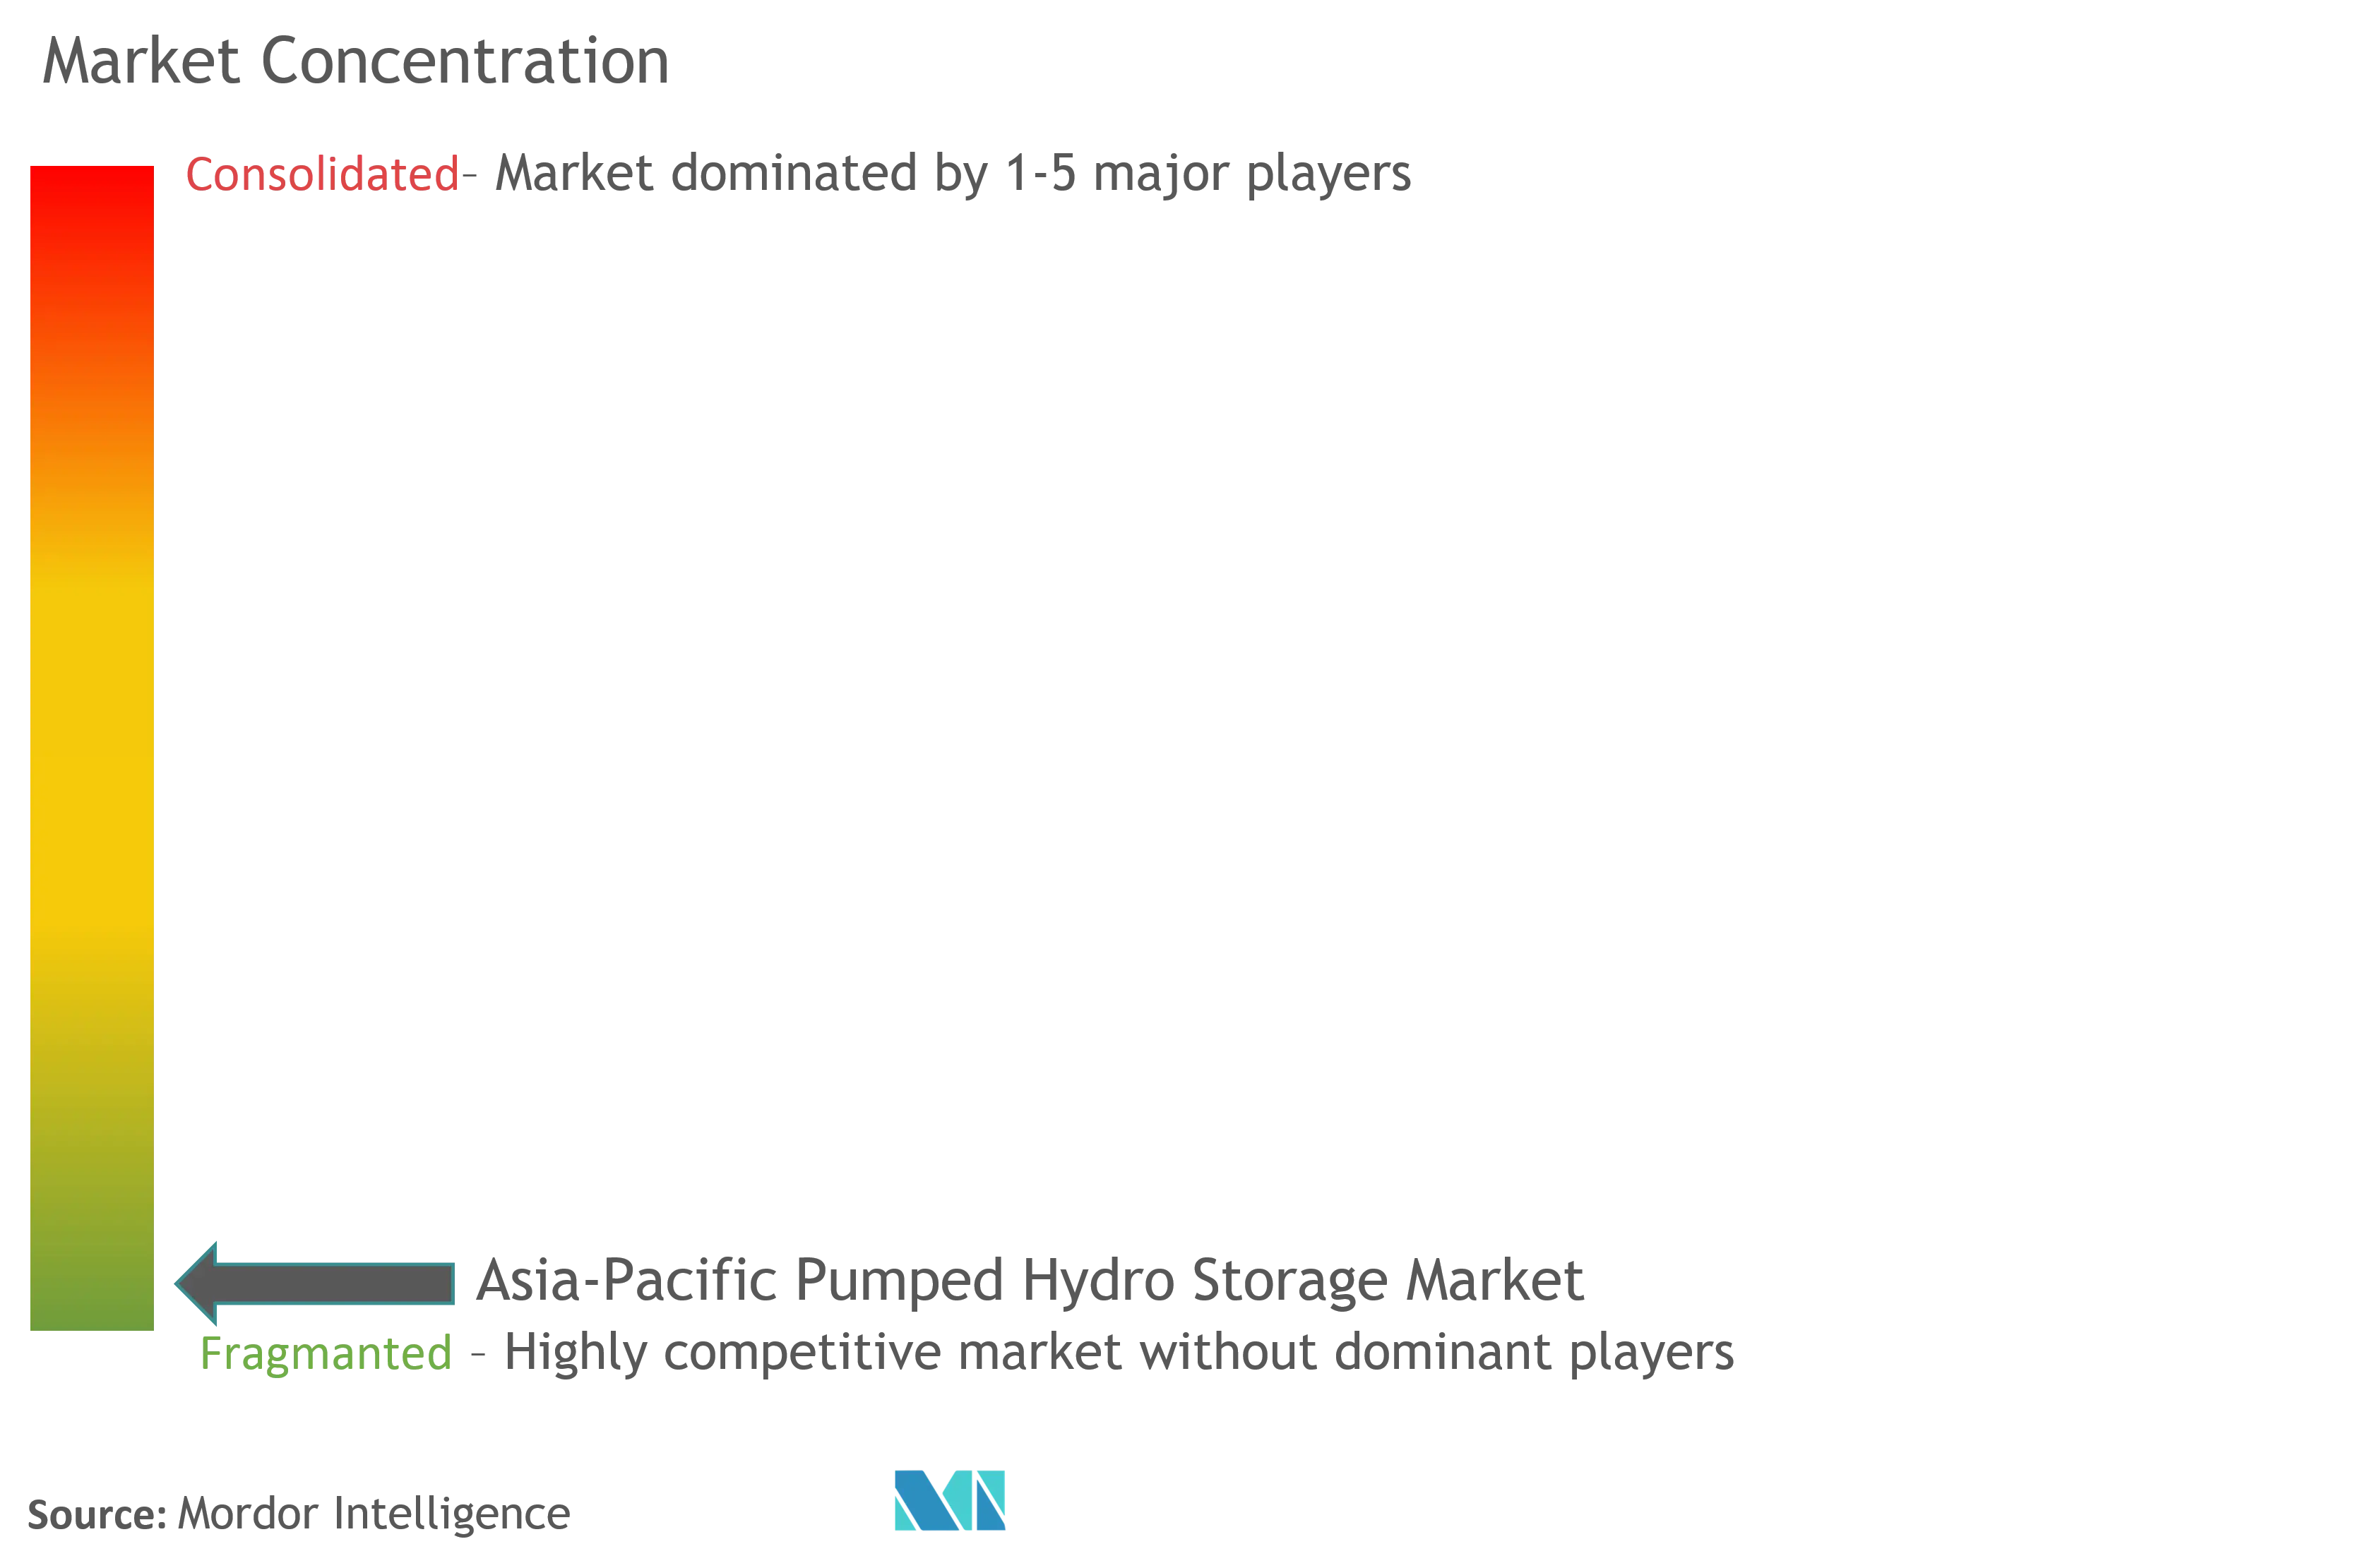 Asia-Pacific Pumped Hydro Storage Market Concentration